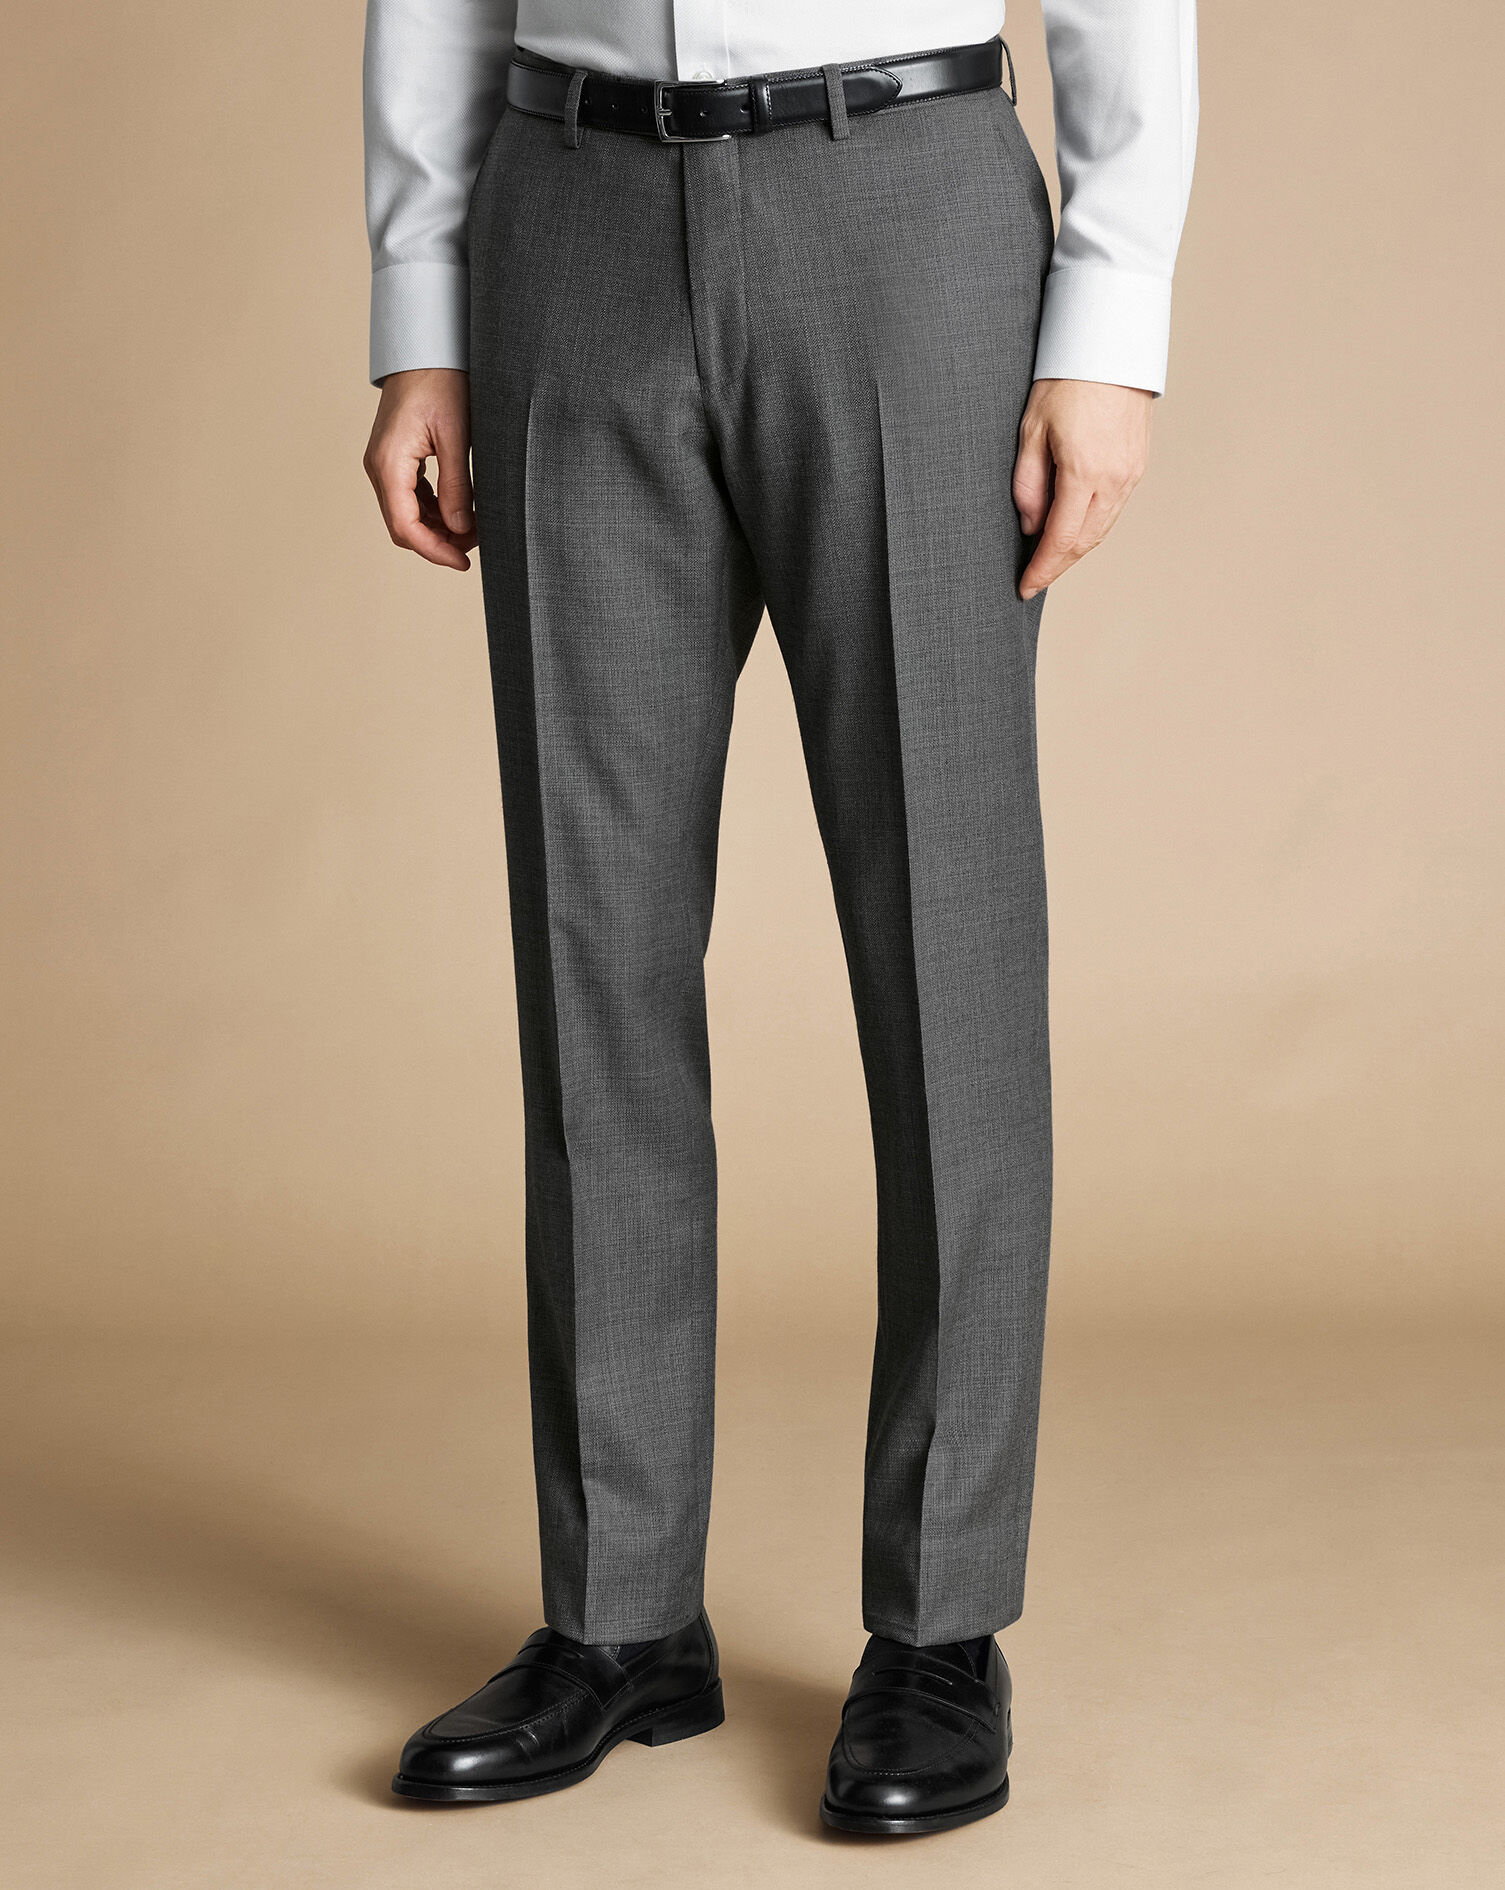 SUL0336GRY TROUSER FRONT